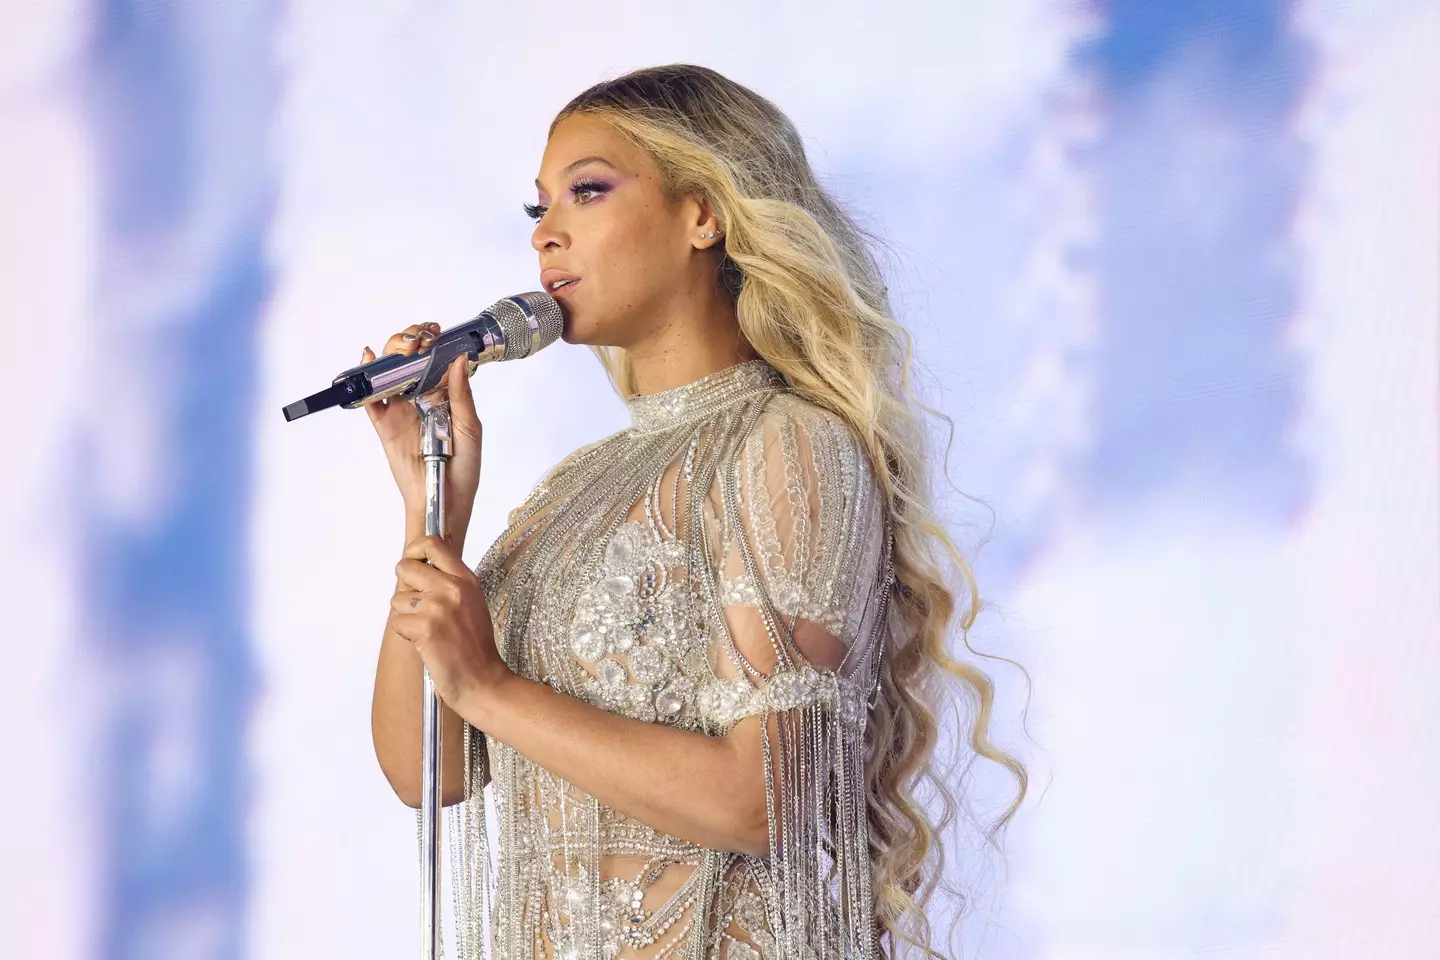 Beyoncé has been praised for extending the Metro service.